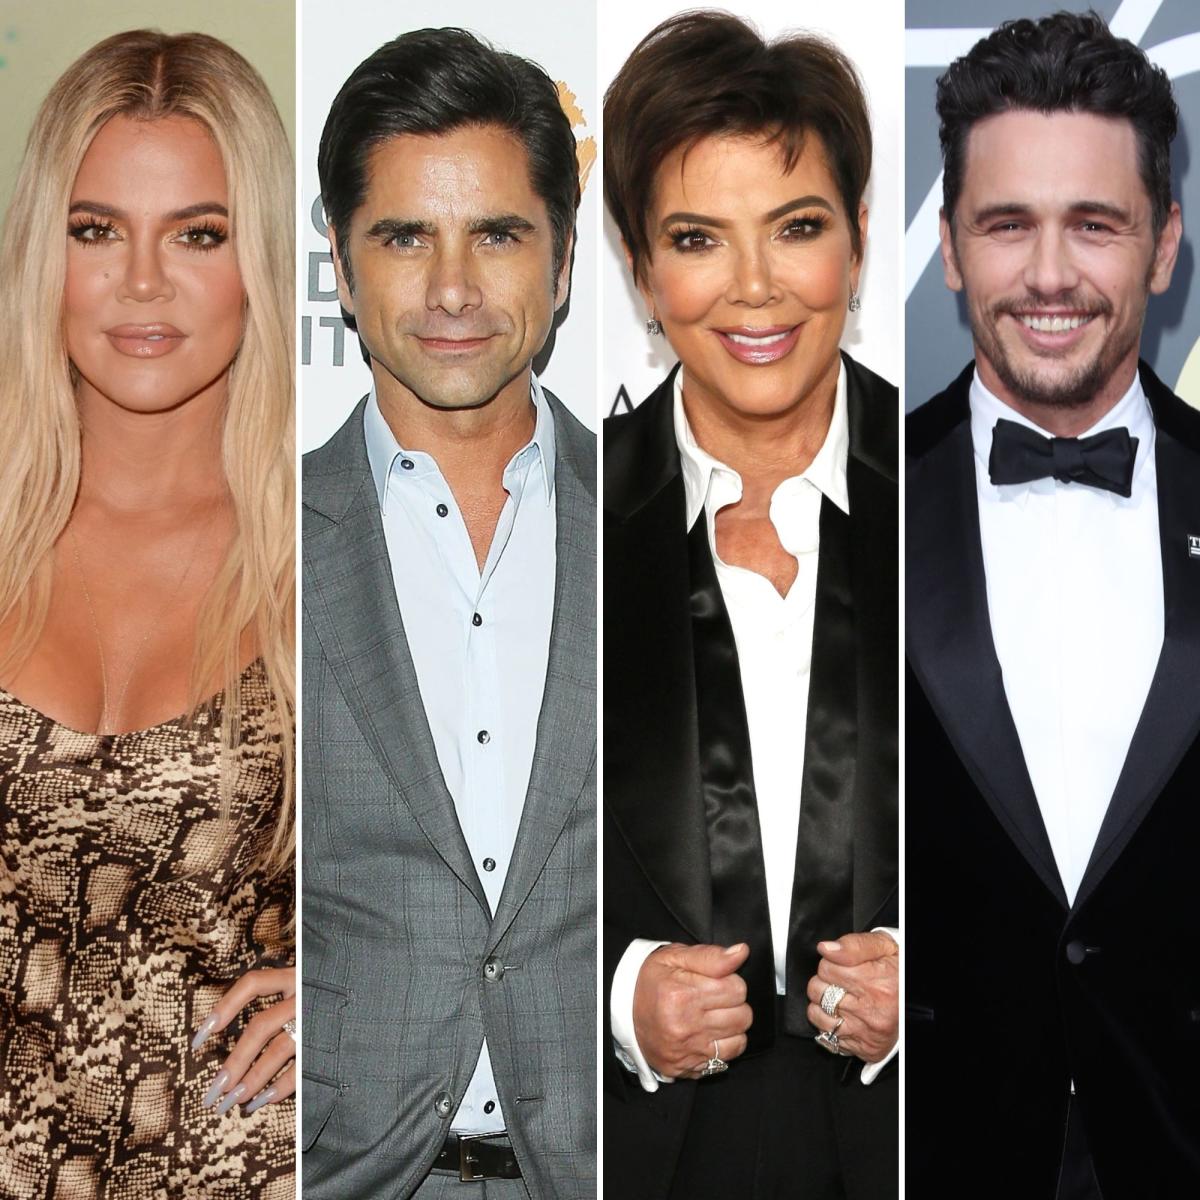 Celebrities With Unreleased Sex Tapes Confessions From Kris Jenner, John Stamos, More!